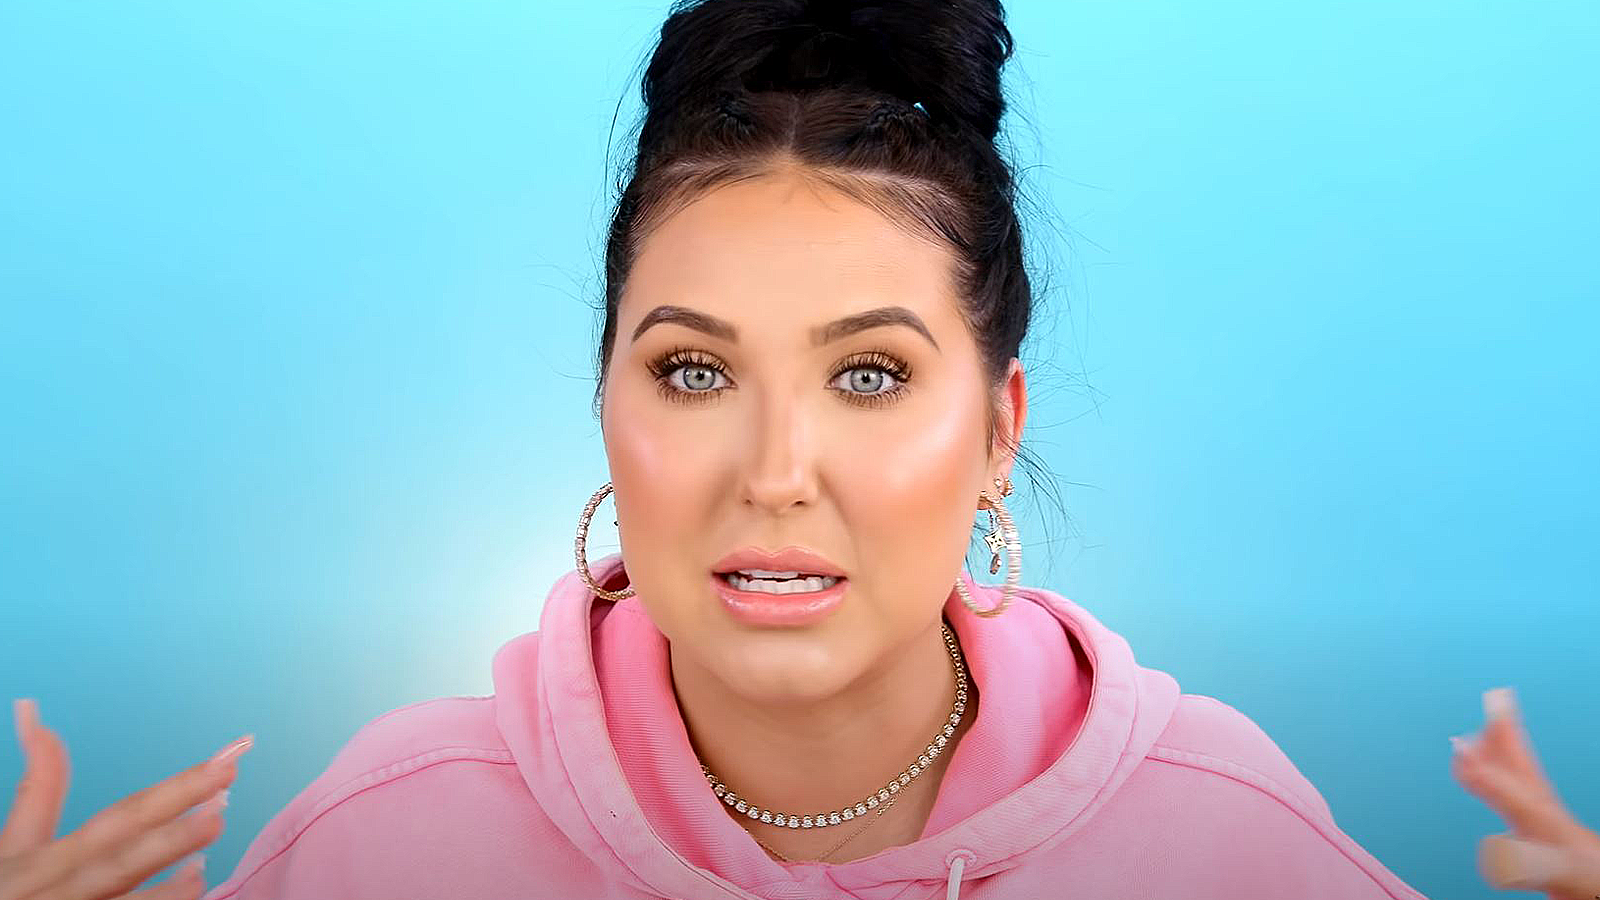 Jaclyn Hill shuts down cosmetics line following years of